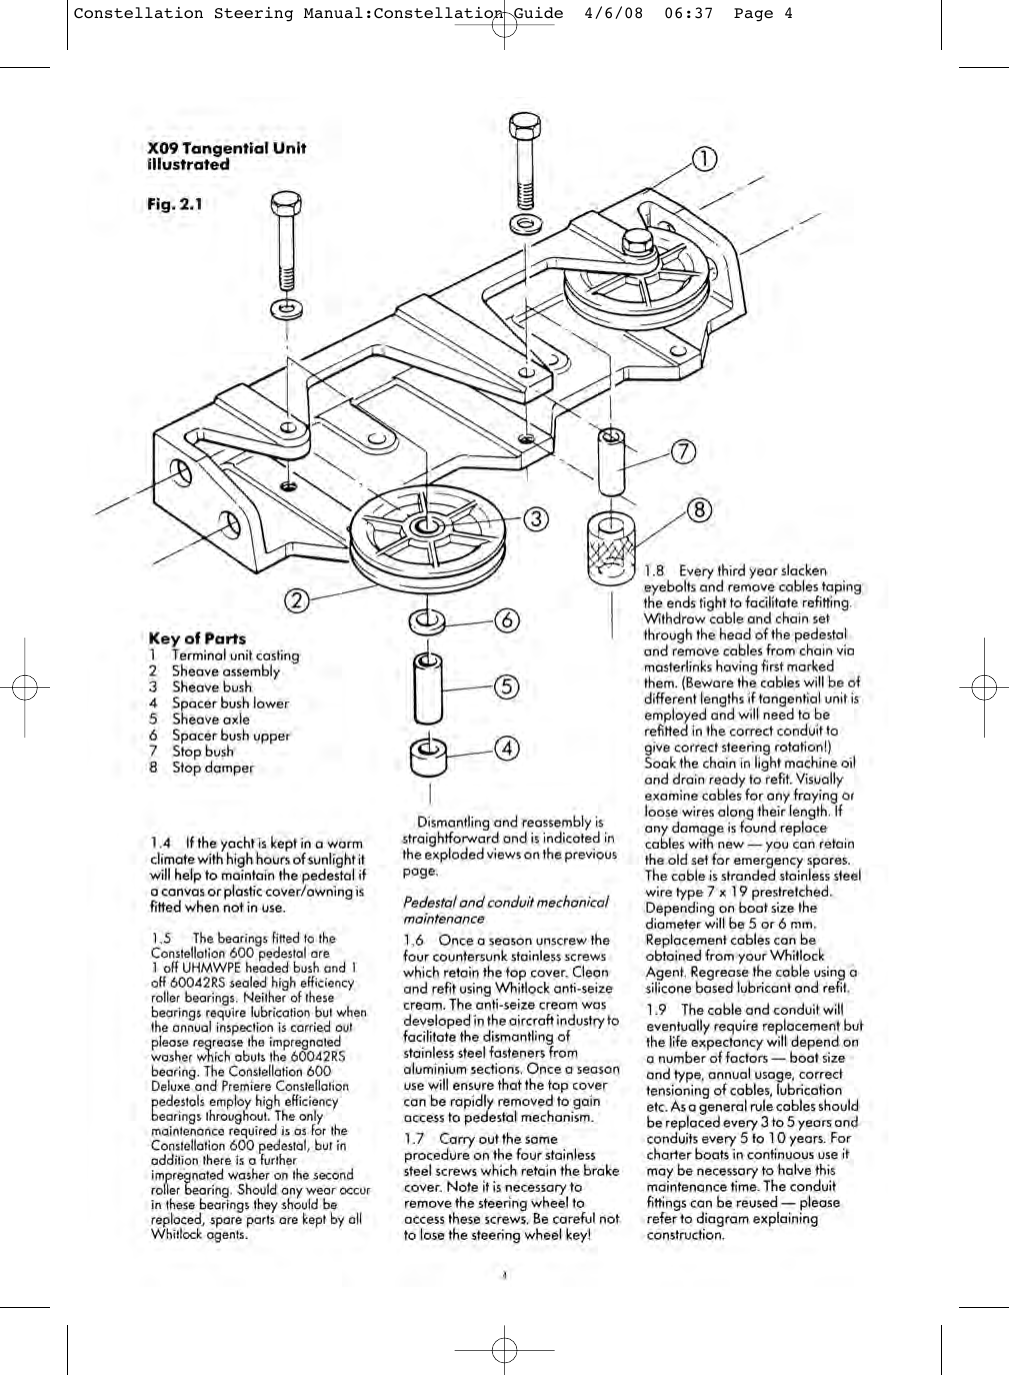 Page 4 of 8 - Constellation Steering Manual:Constellation Guide Constellation-Steering-Manual